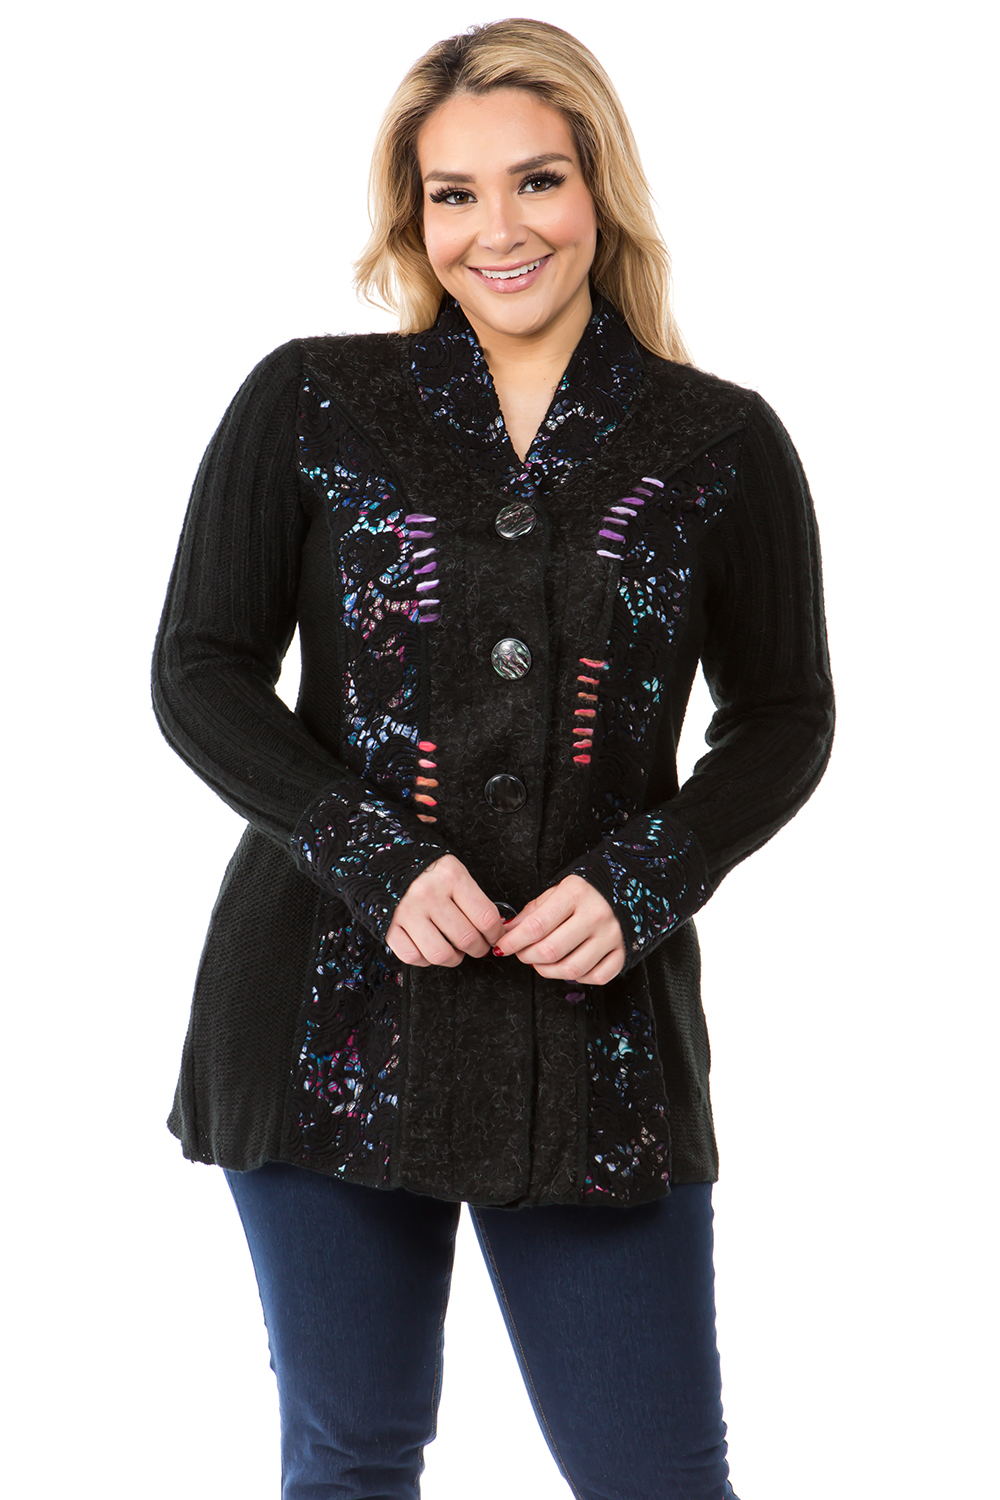 Women's Black Patchwork Lace Button Down Cardigan Coat Sweater - image 1 of 5